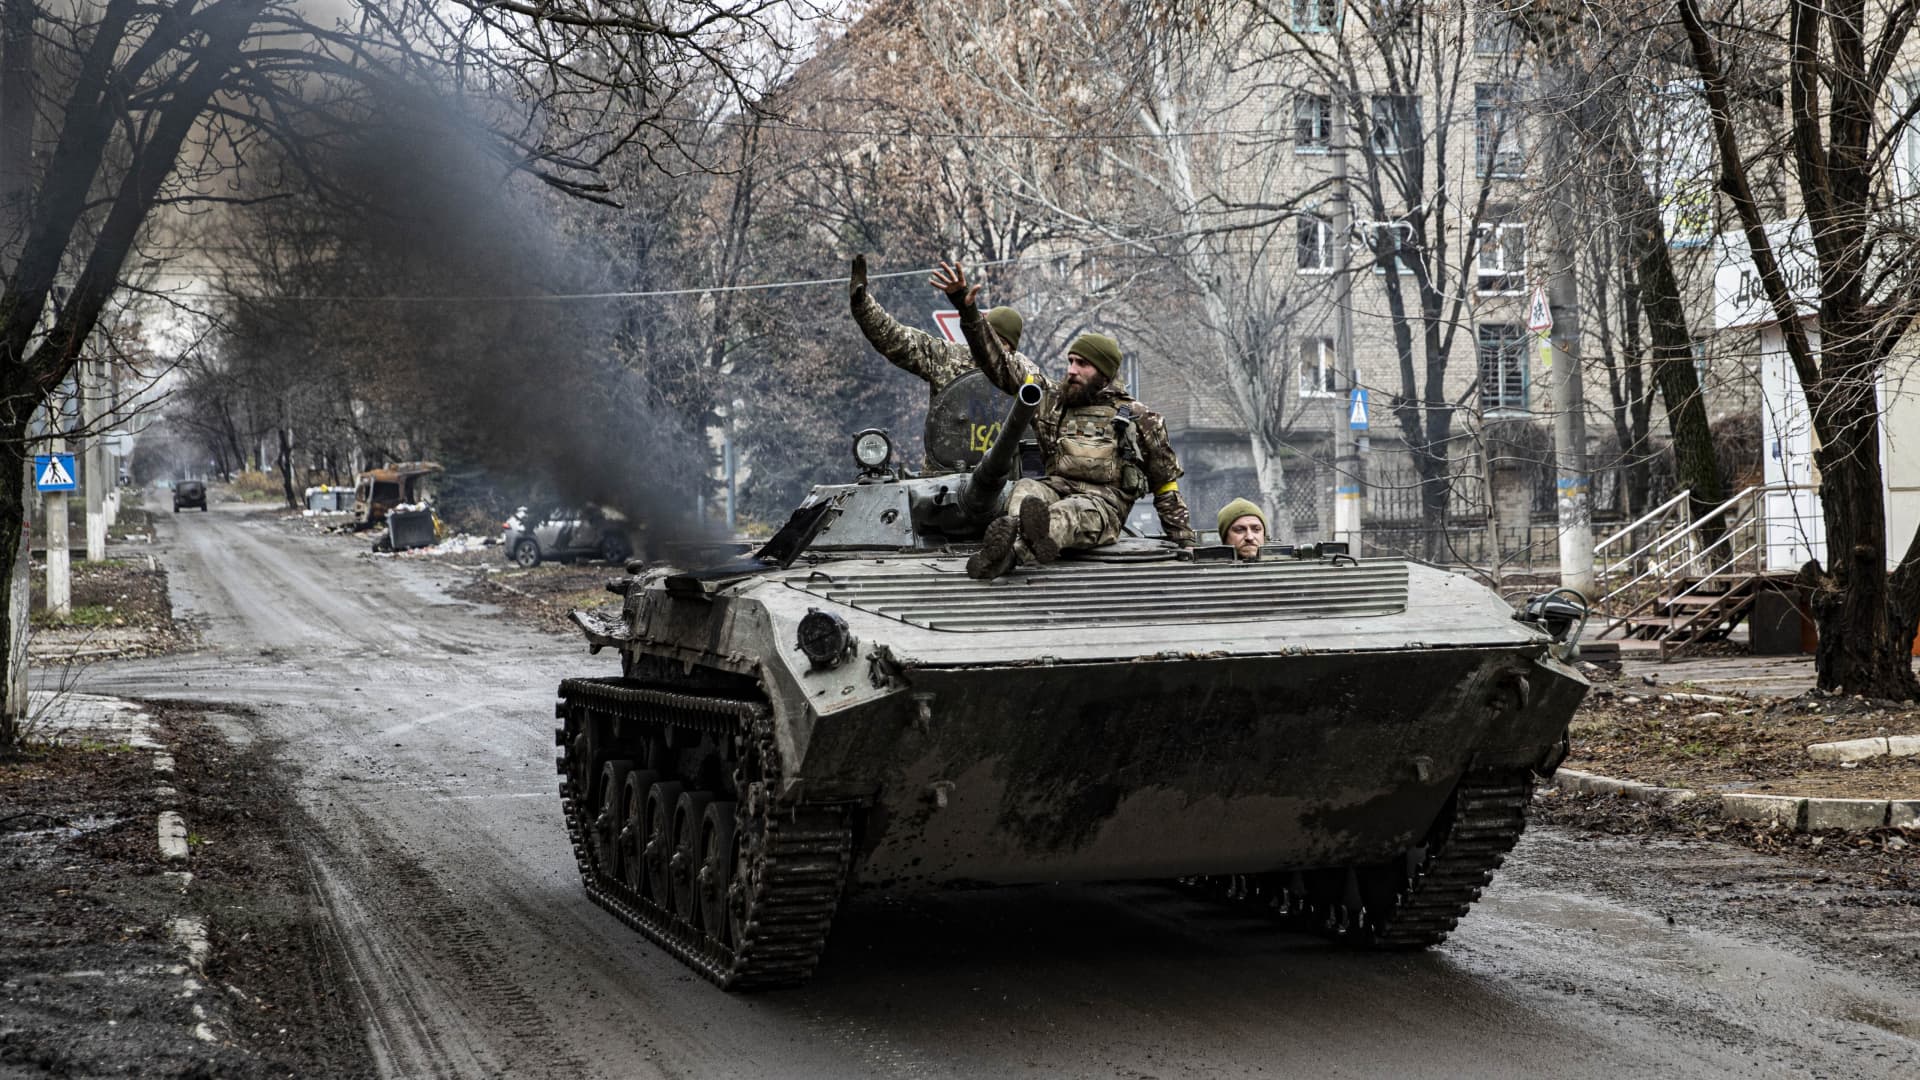 Ukrainian soldiers are seen in a tank as the U.K. defense ministry says Russian reservists have likely suffered heavy casualties.